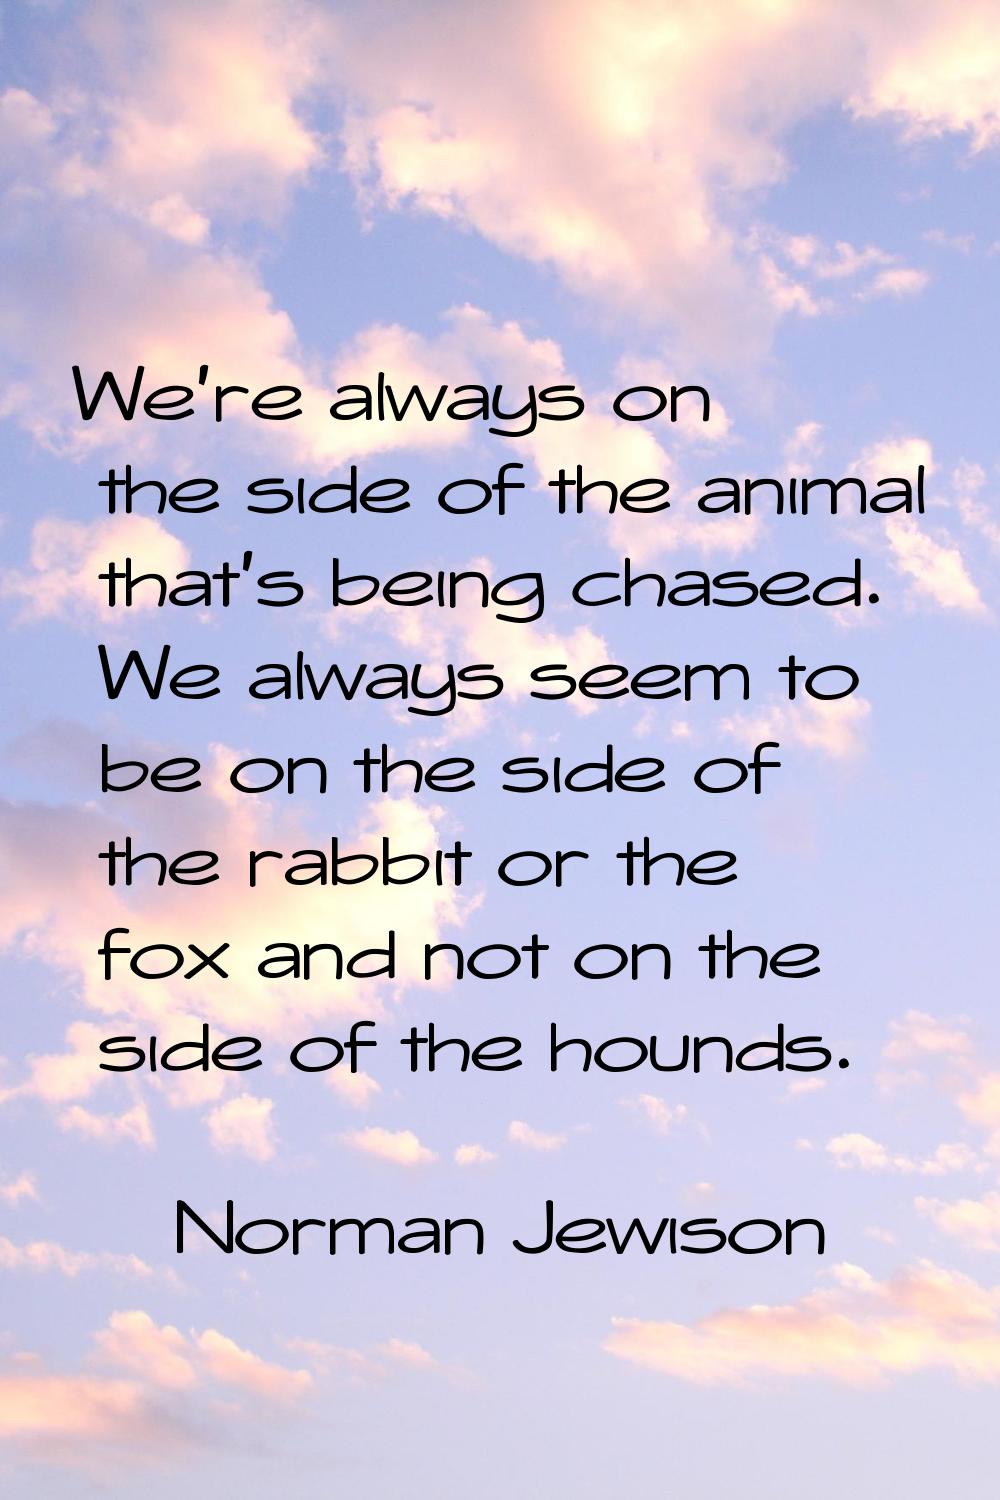 We're always on the side of the animal that's being chased. We always seem to be on the side of the